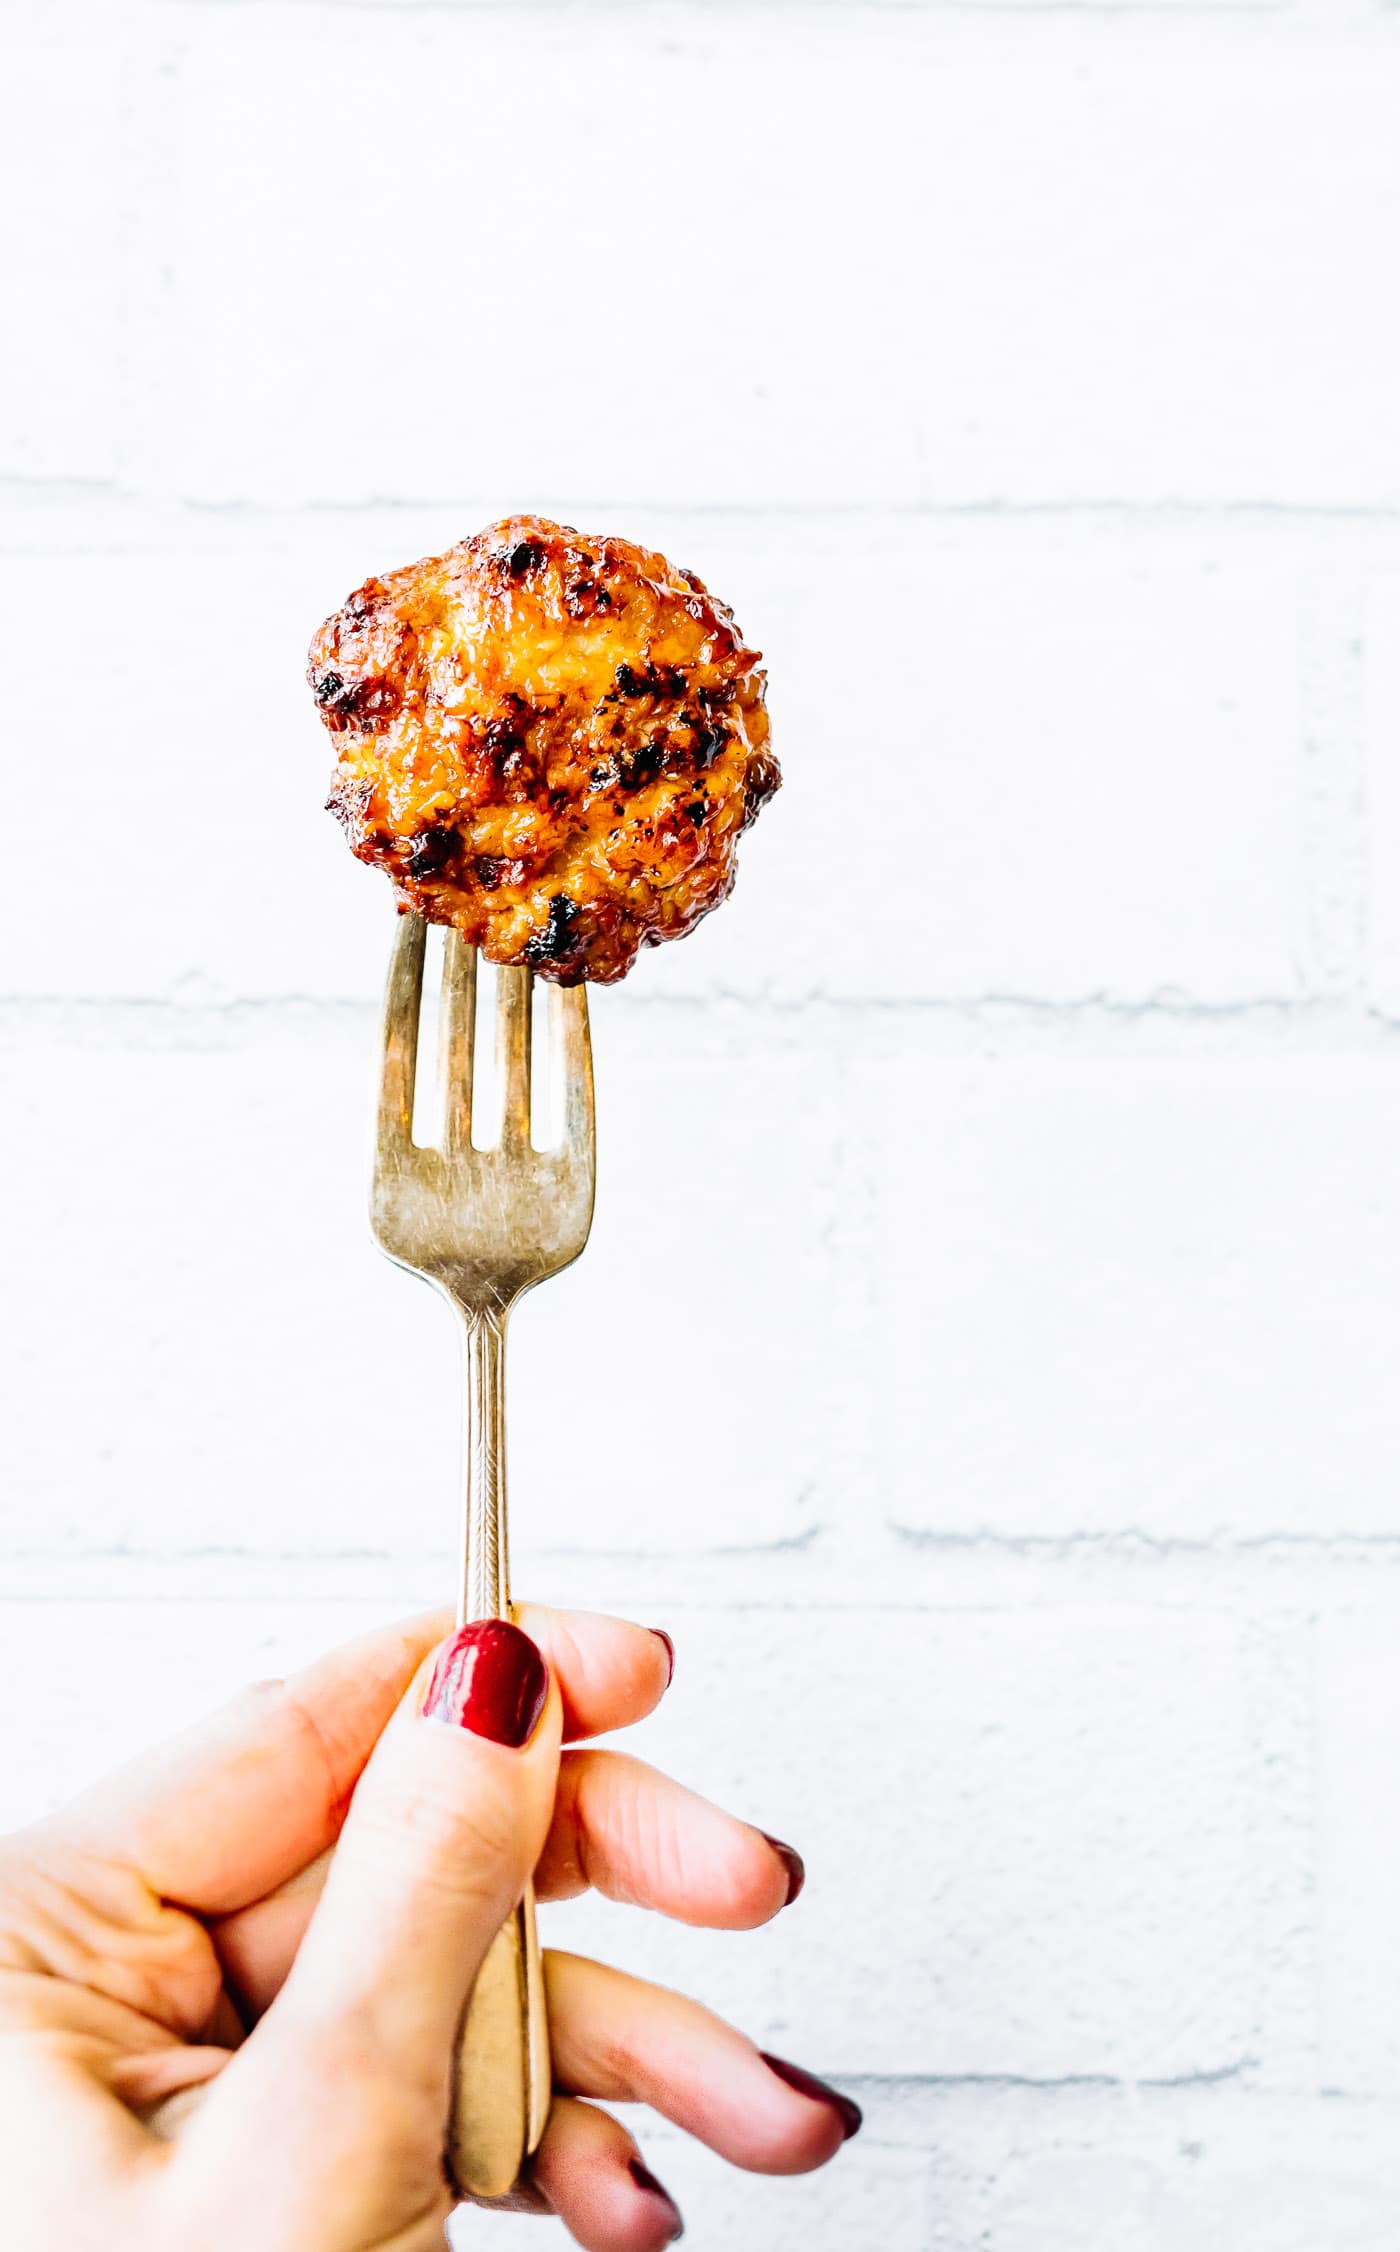 An air fried breakfast sausage on a fork